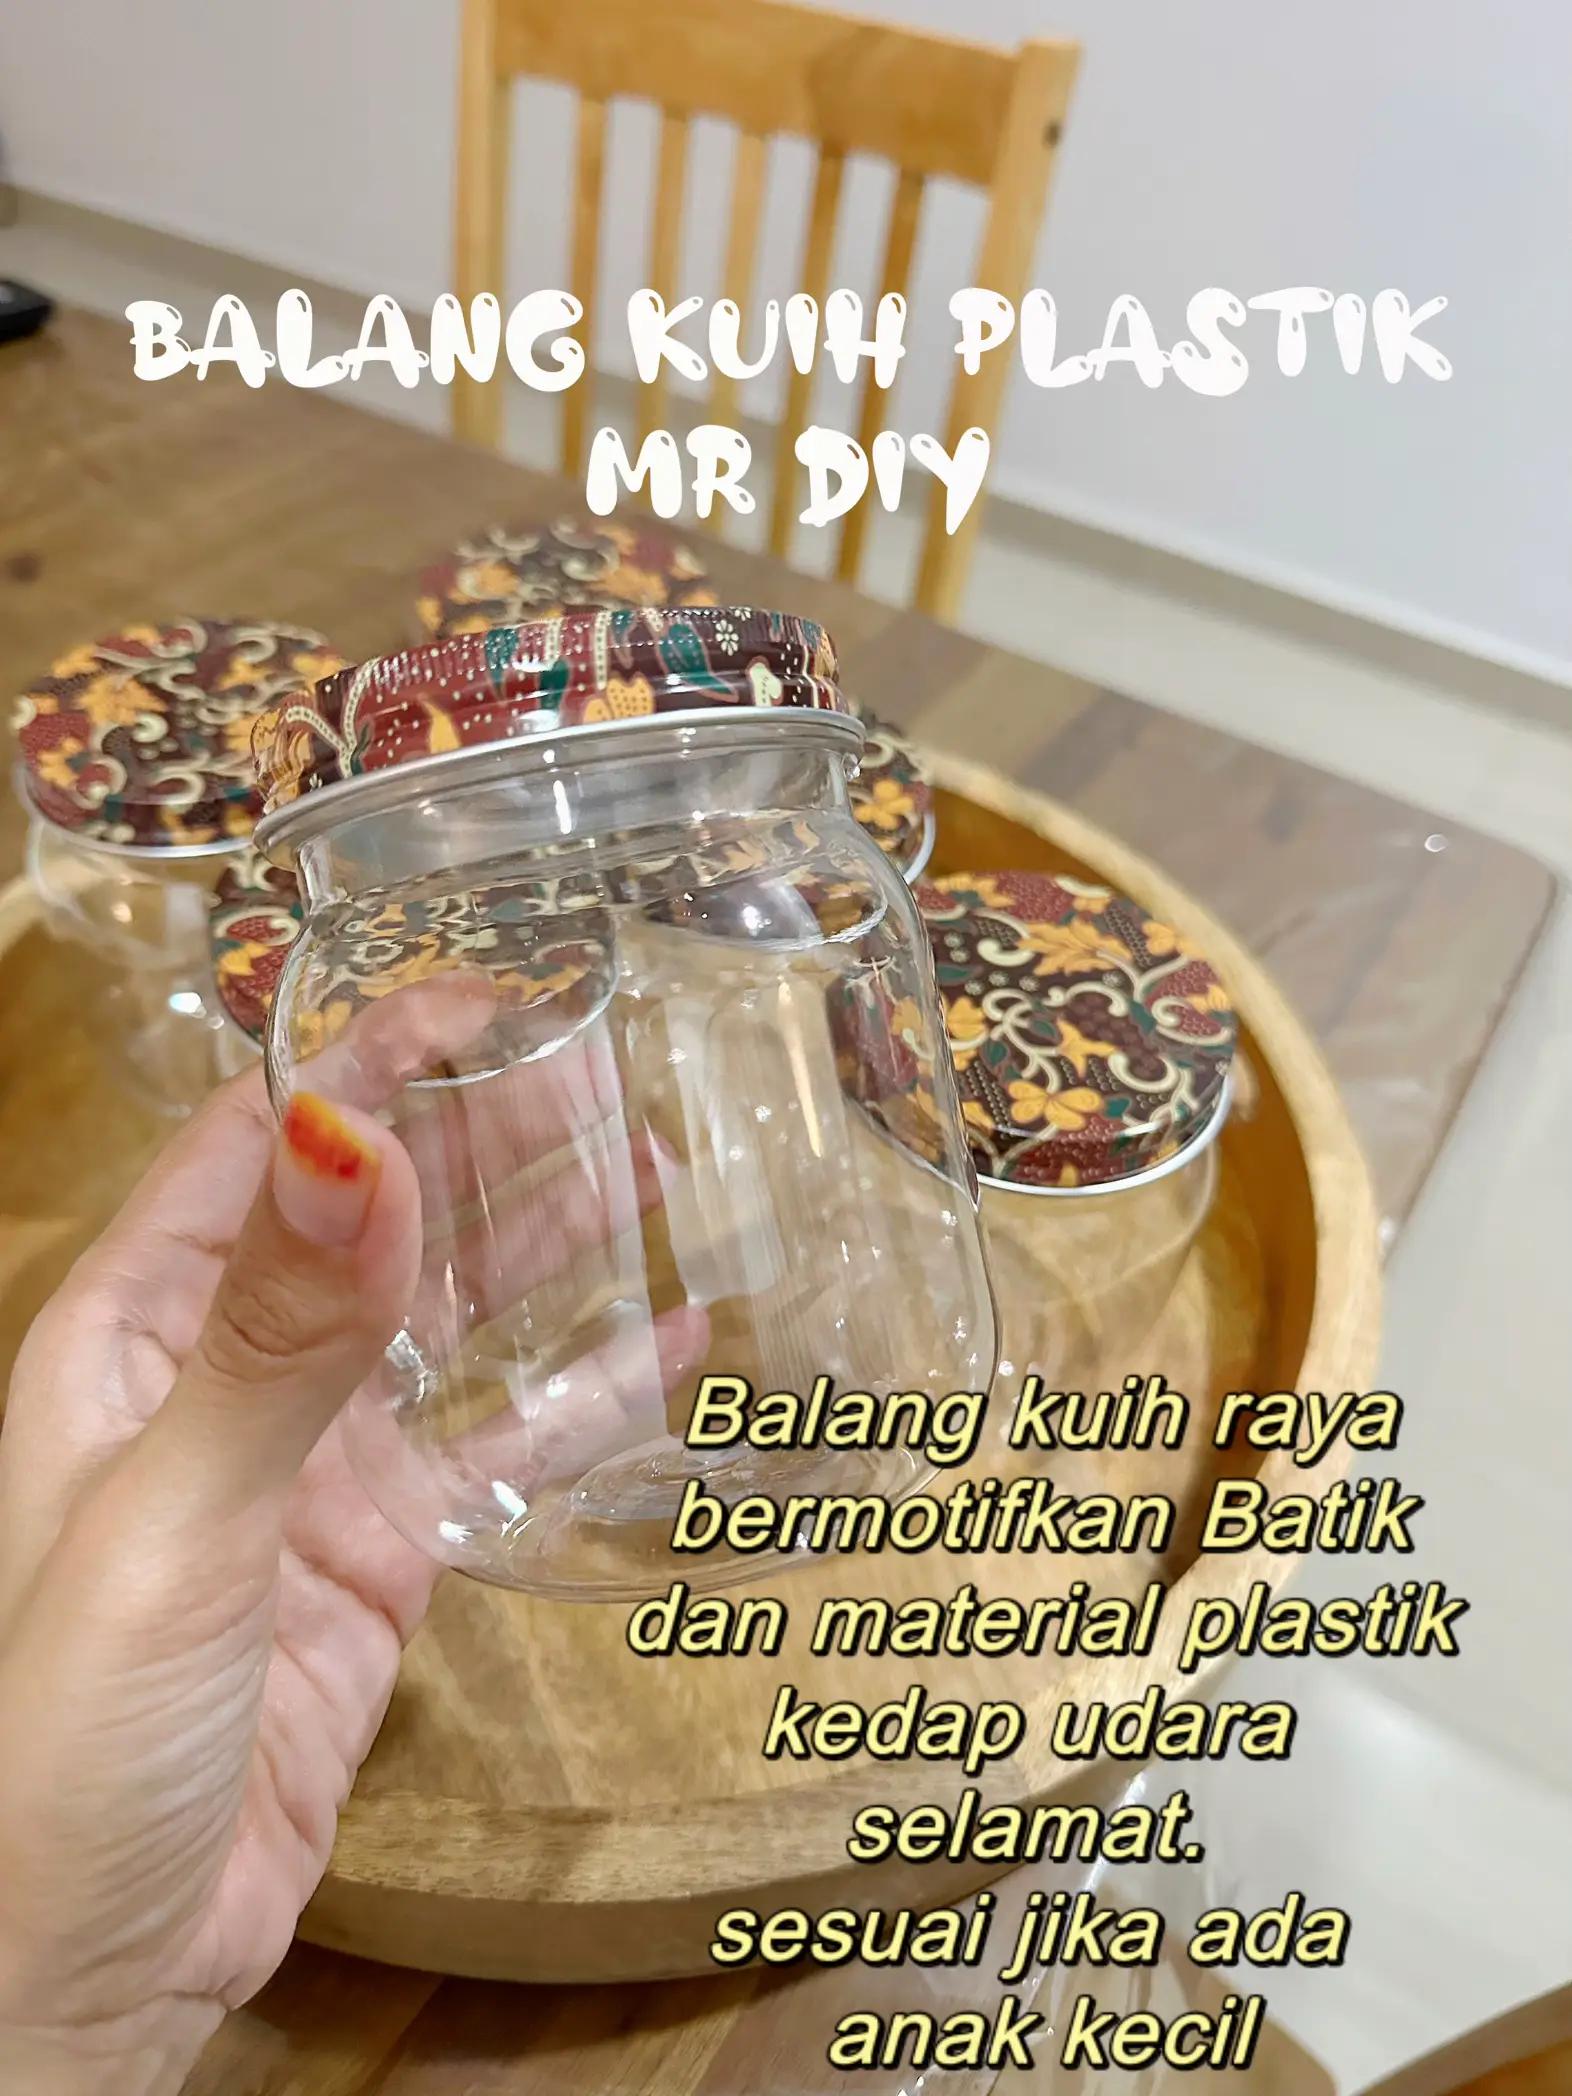 BEKAS KUIH RAYA AESTHETIC OBJET HOME🍪, Gallery posted by WrappedbyLea